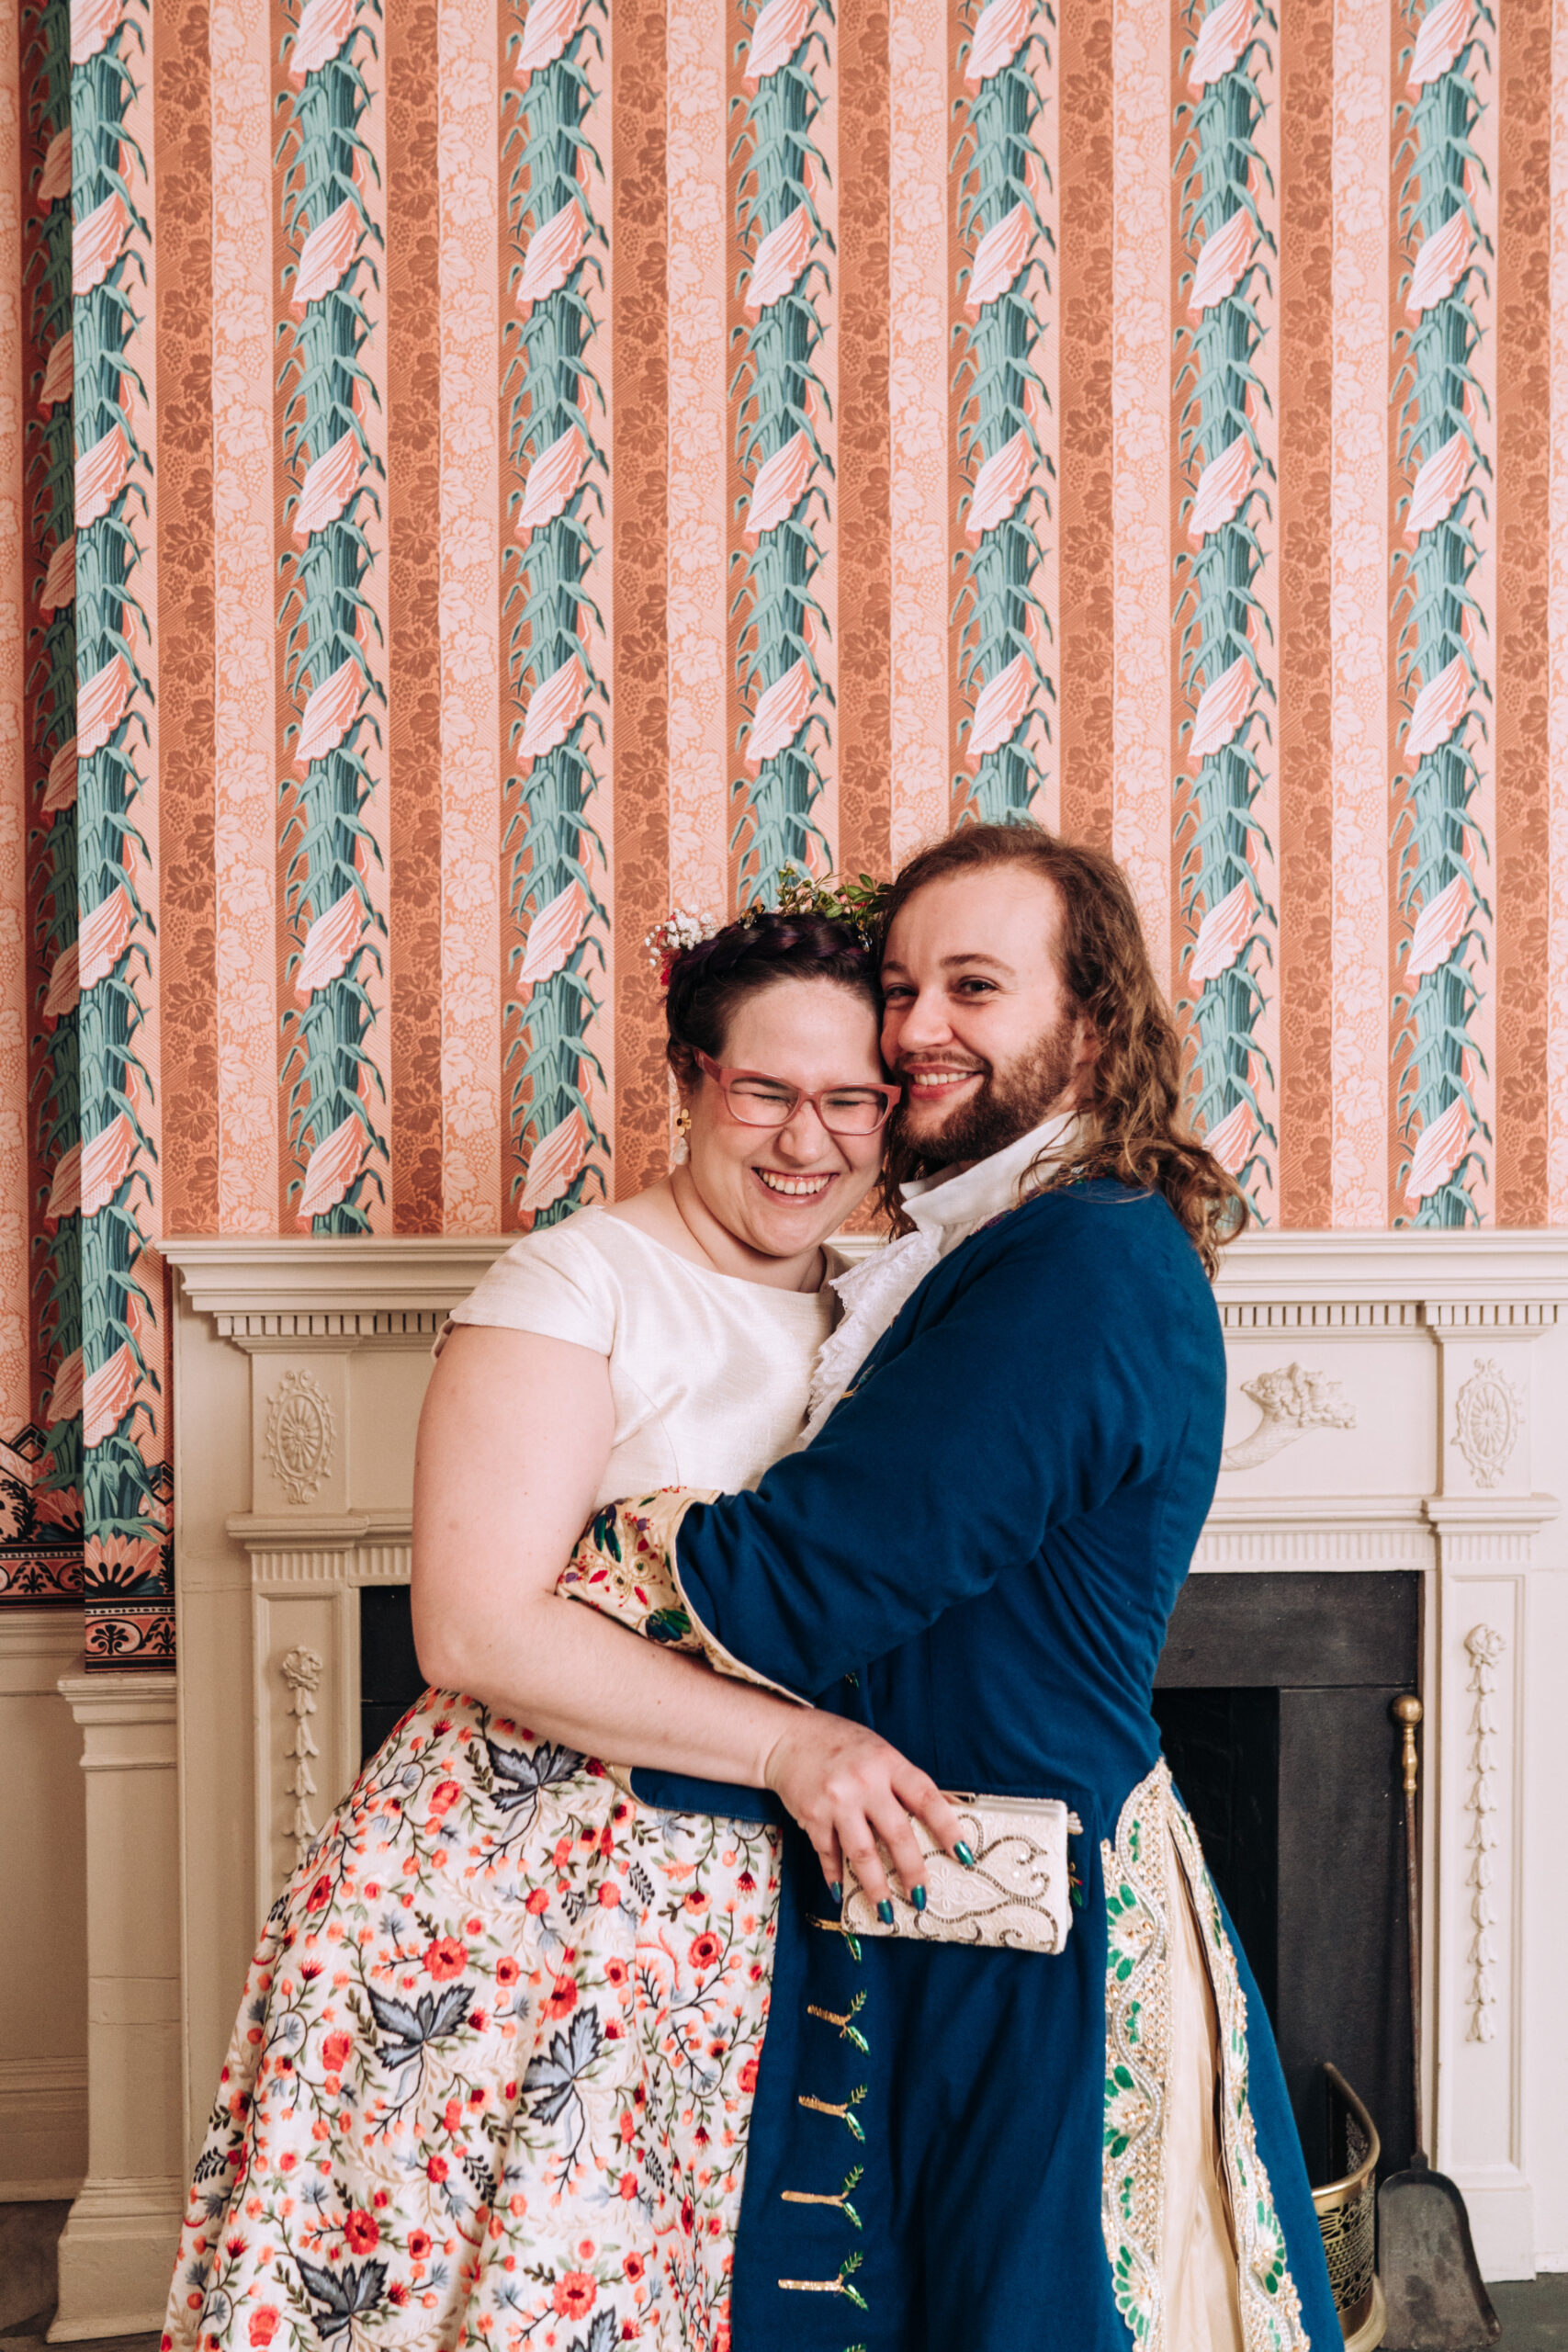 A queer couple Maria (she/her) and Naomh (he/him) hug and laugh on their wedding day. They both wear bespoke Renaissance outfits and are standing in front of bold, striped wallpaper.